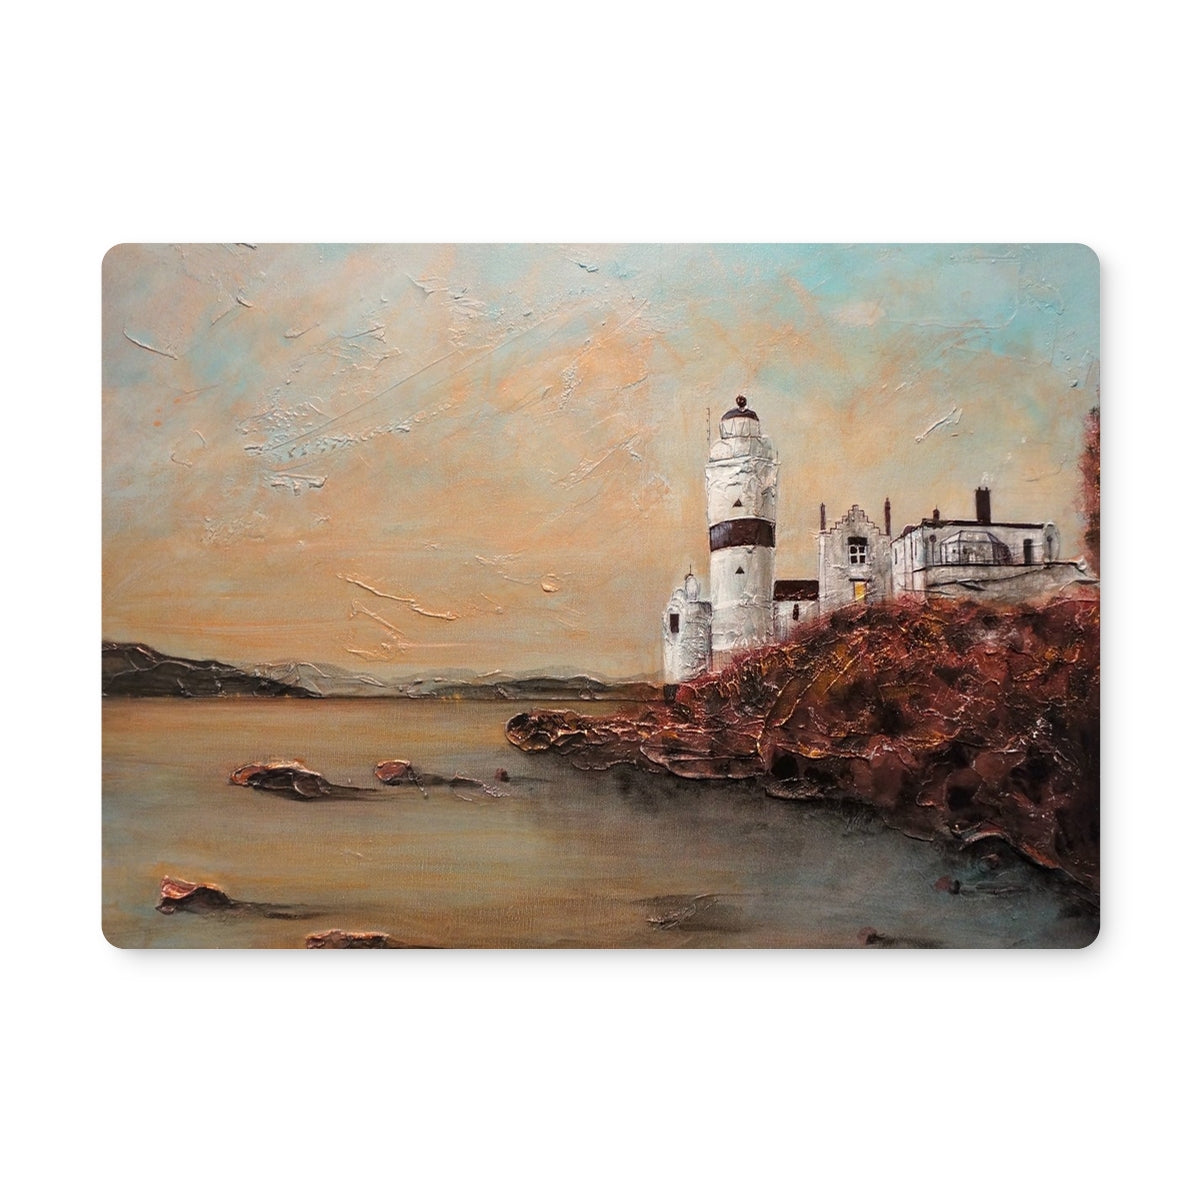 Cloch Lighthouse Dawn Art Gifts Placemat-Placemats-River Clyde Art Gallery-2 Placemats-Paintings, Prints, Homeware, Art Gifts From Scotland By Scottish Artist Kevin Hunter